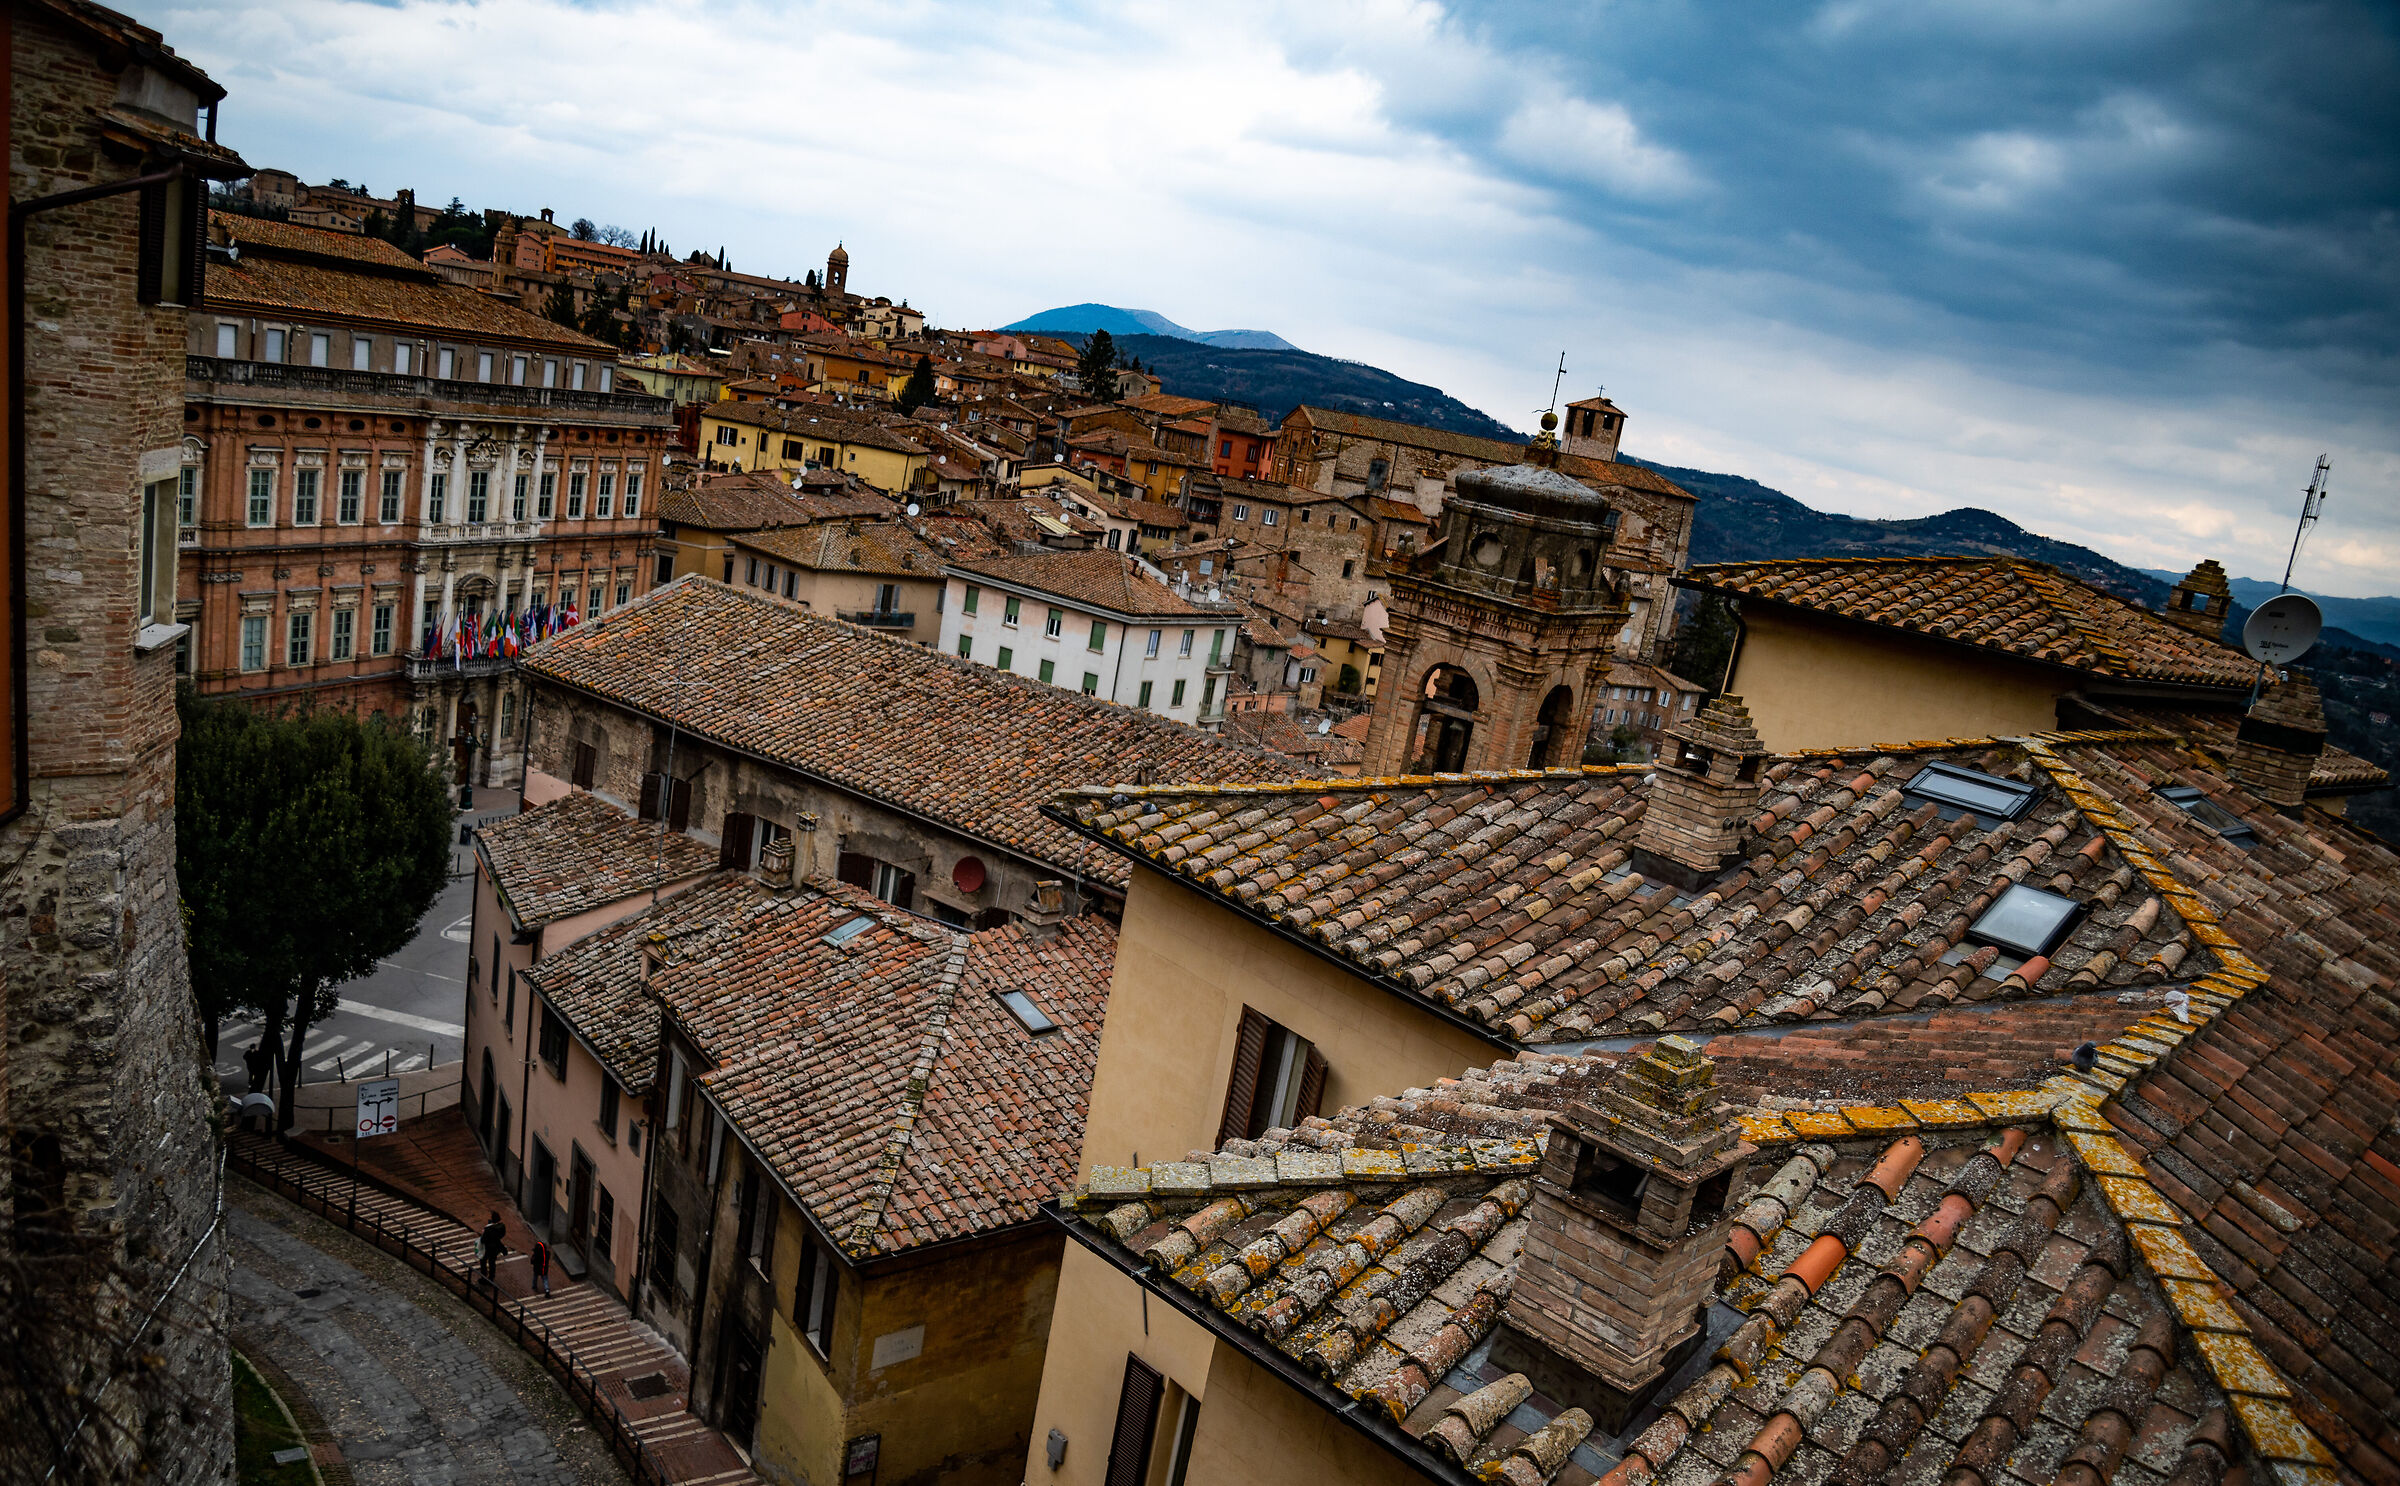 Perugian roofs...